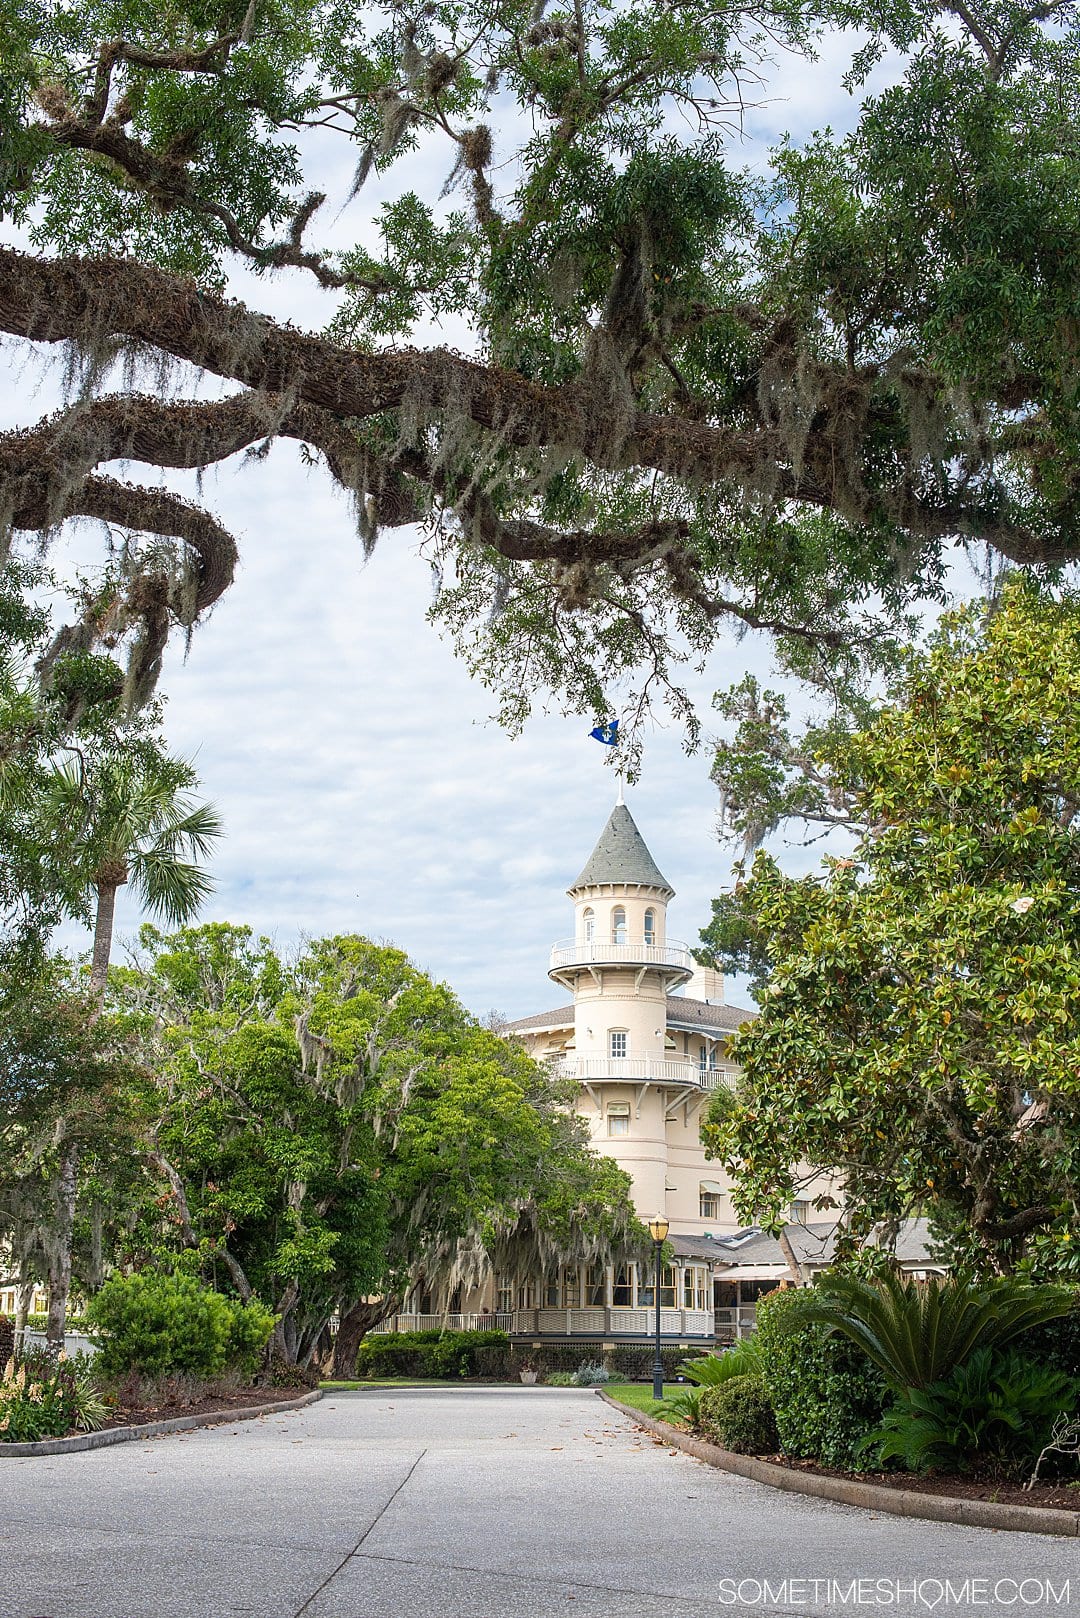 Things to do in Jekyll Island, Georgia, including restaurants with great food, beaches with iconic driftwood, sea turtles and hotel resorts for your vacation. If you're looking for a beautiful U.S. state to travel to for your trip this is a great destination. #JekyllIlsand #Georgia #eastcoast | Georgia | Beach Destinations | US Travel destinations by Sometimes Home